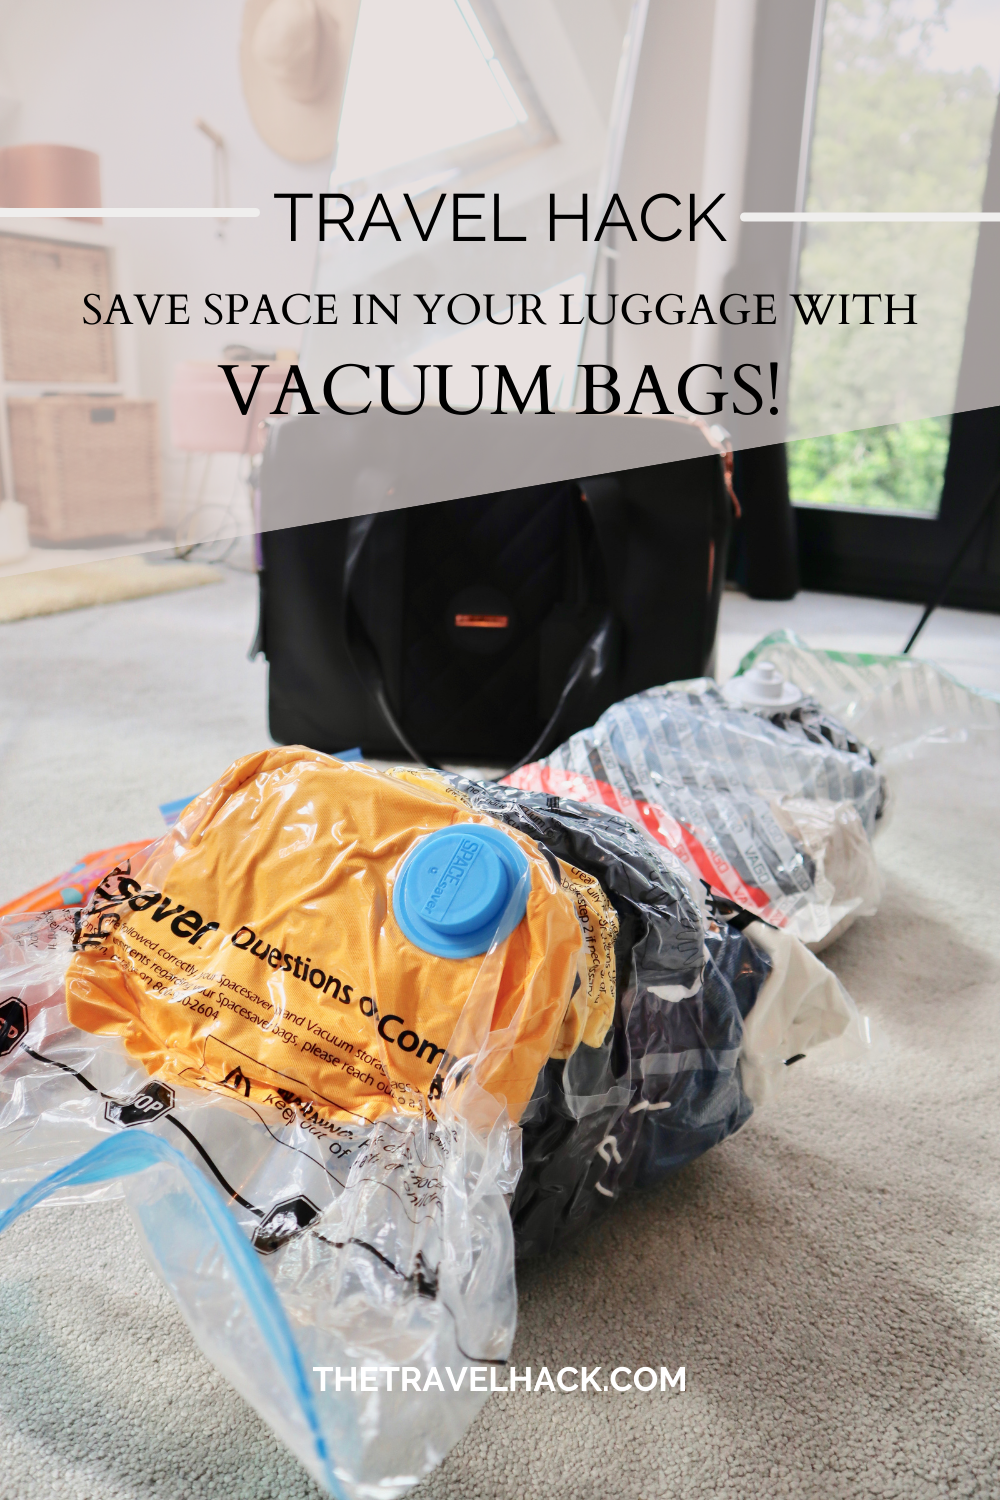 https://thetravelhack.com/wp-content/uploads/2022/07/Using-vacuum-bags-for-travelling.png